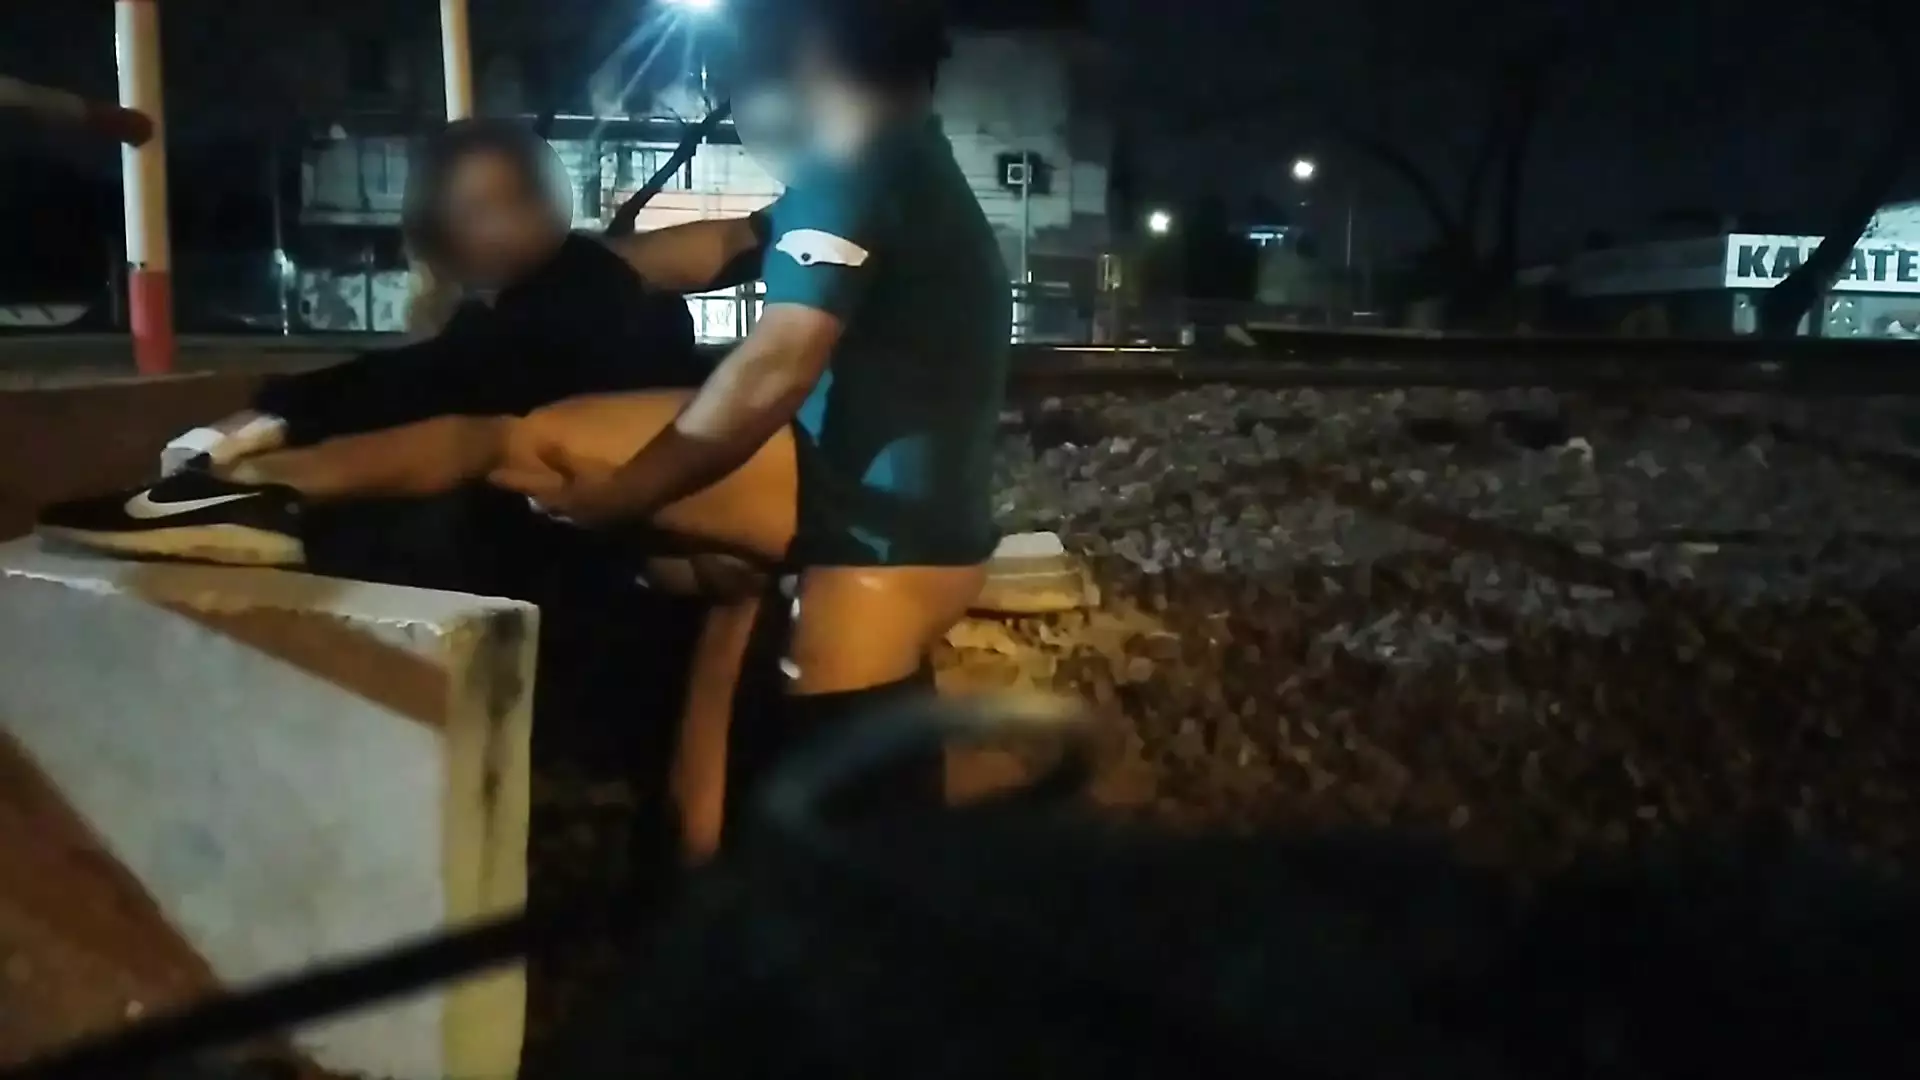 sex on the streets in public caught by stranger voyeurs walking naked through the city pic